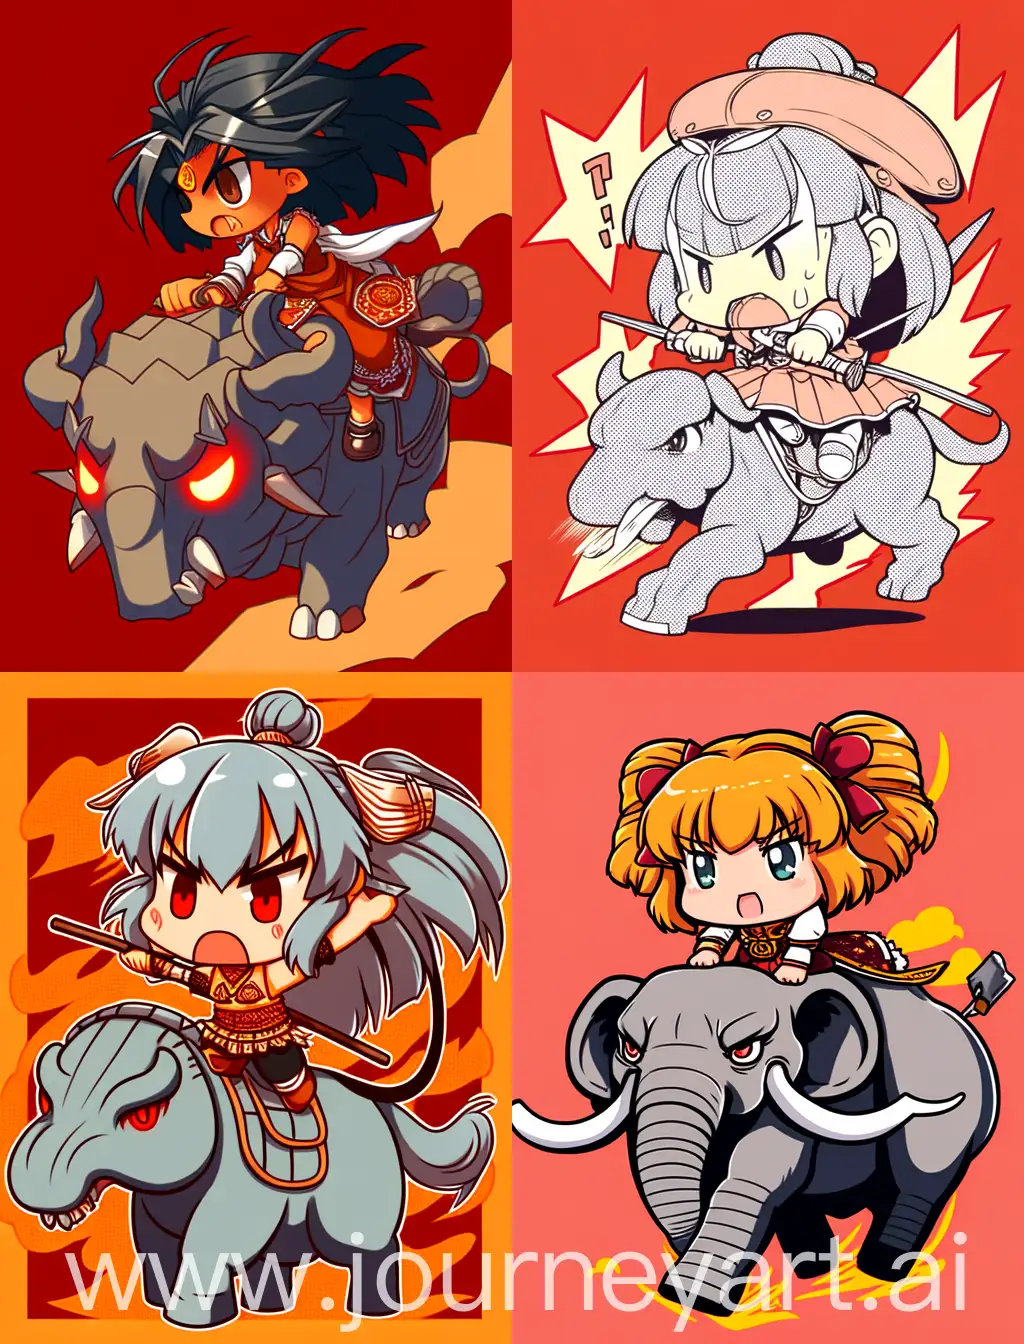 angry chibi anime girl riding an elephant, cartoon anime style, with strong lines, with orange solid background